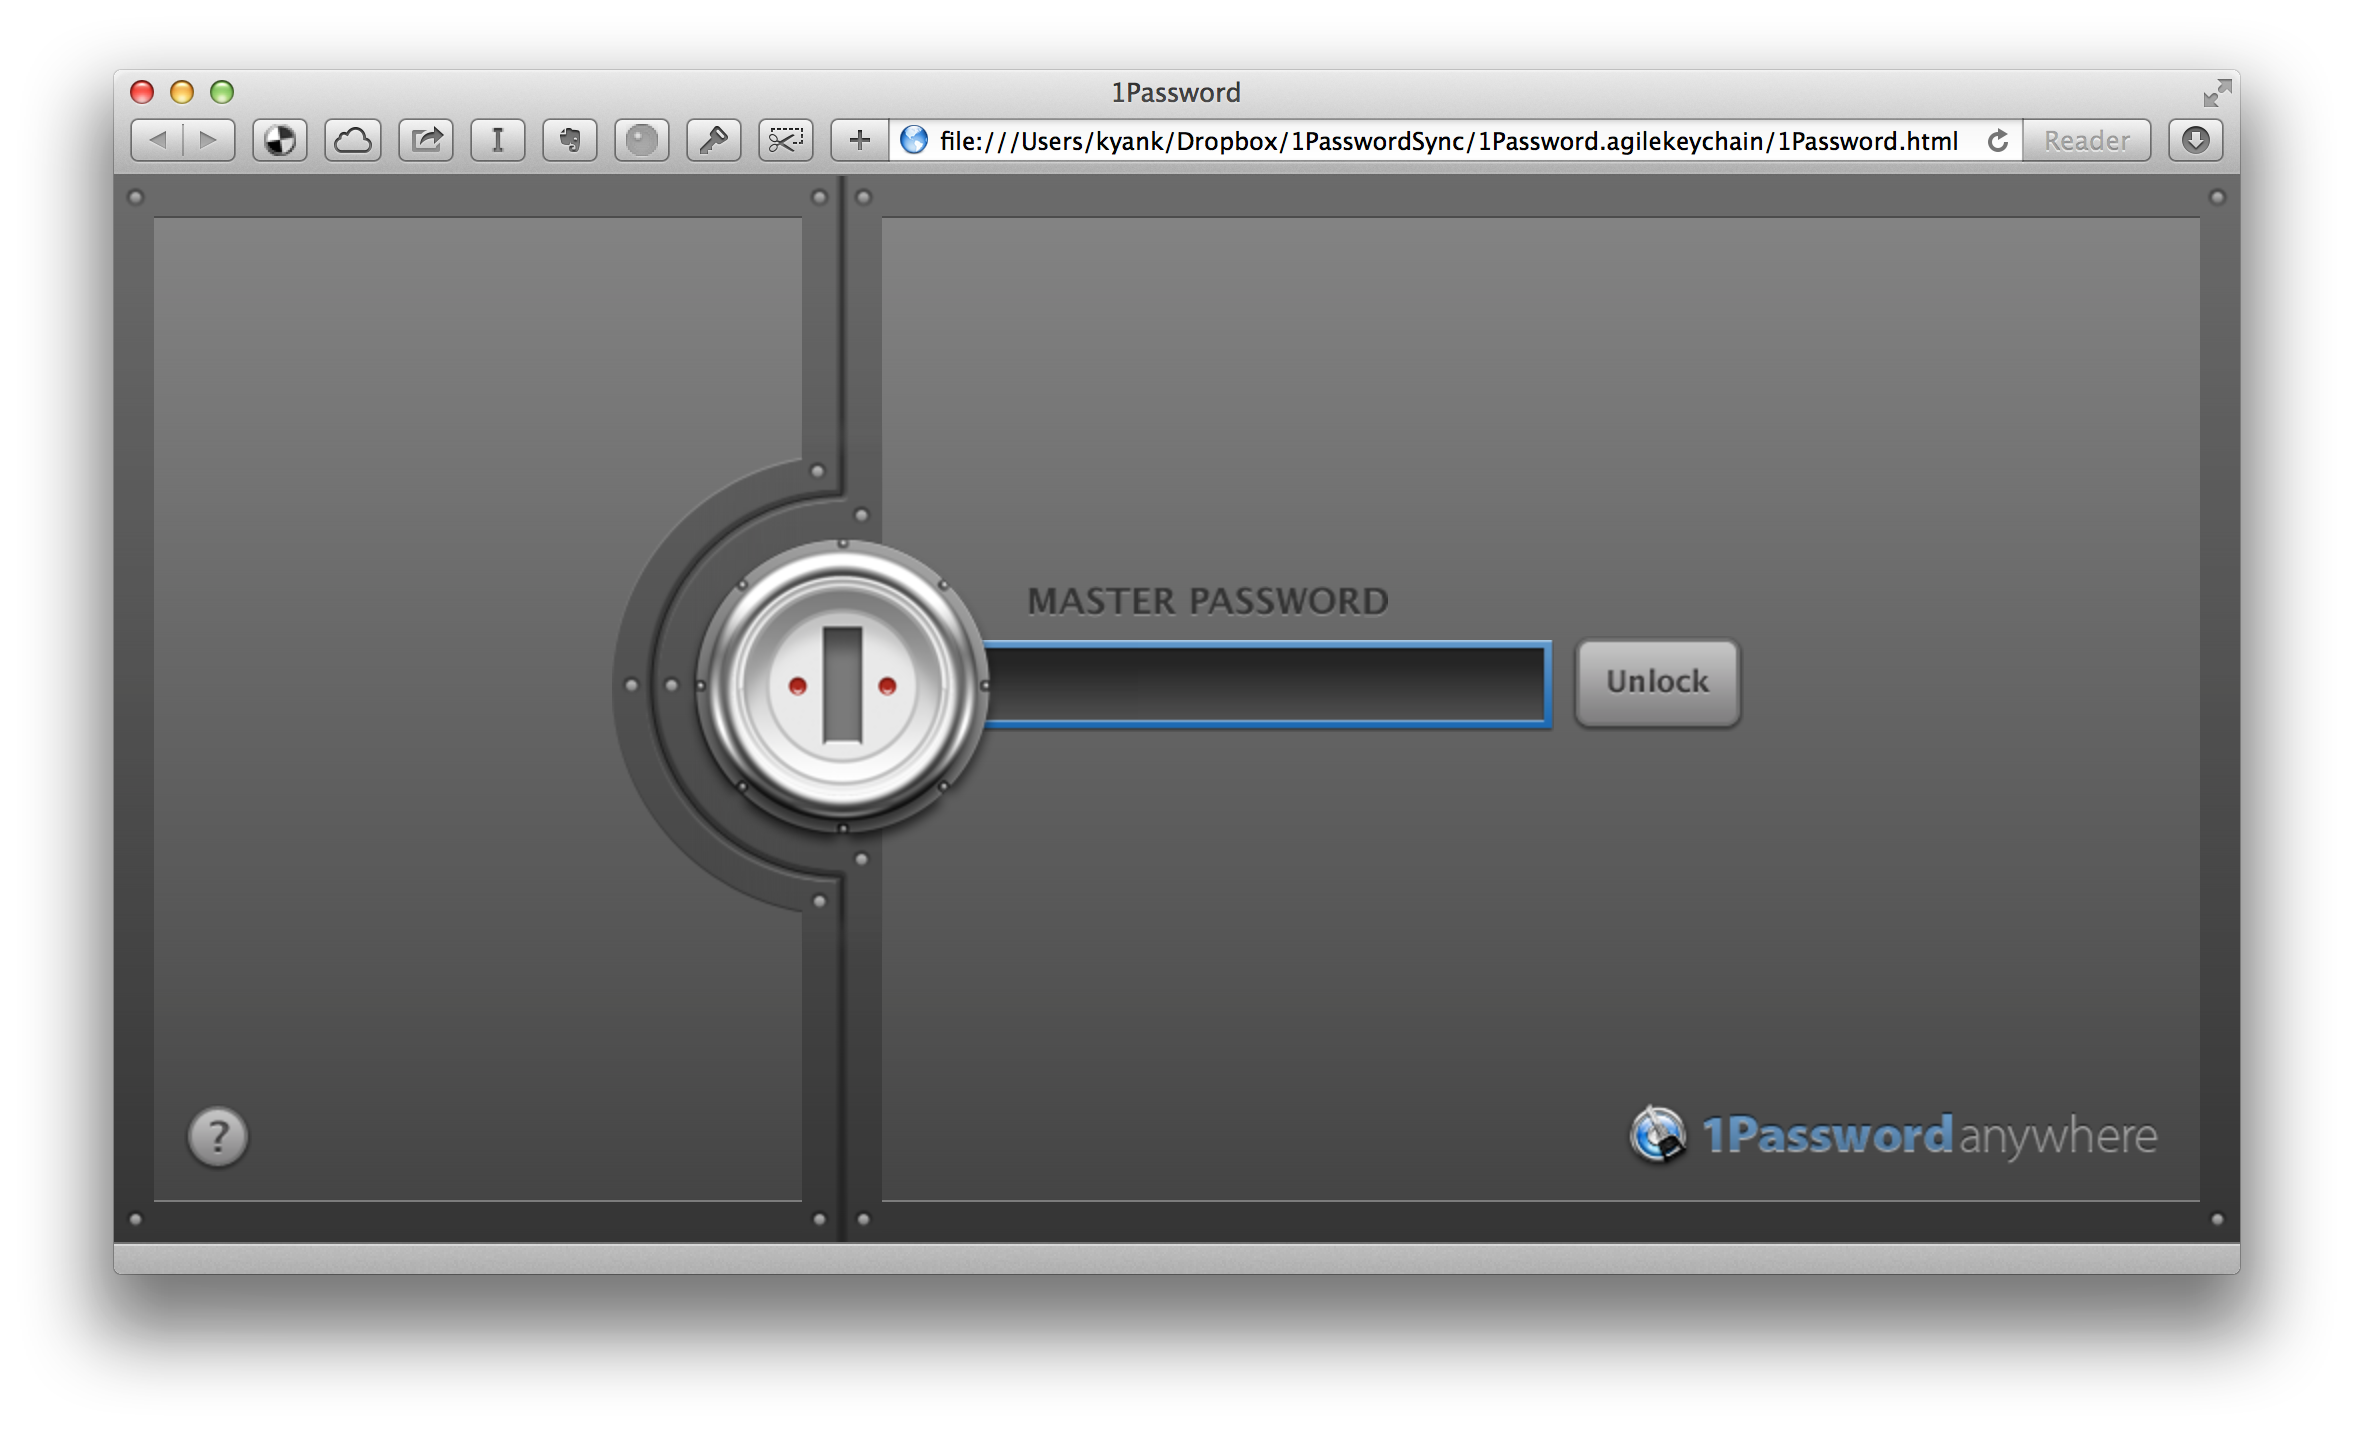 the 1Password Anywhere master password prompt